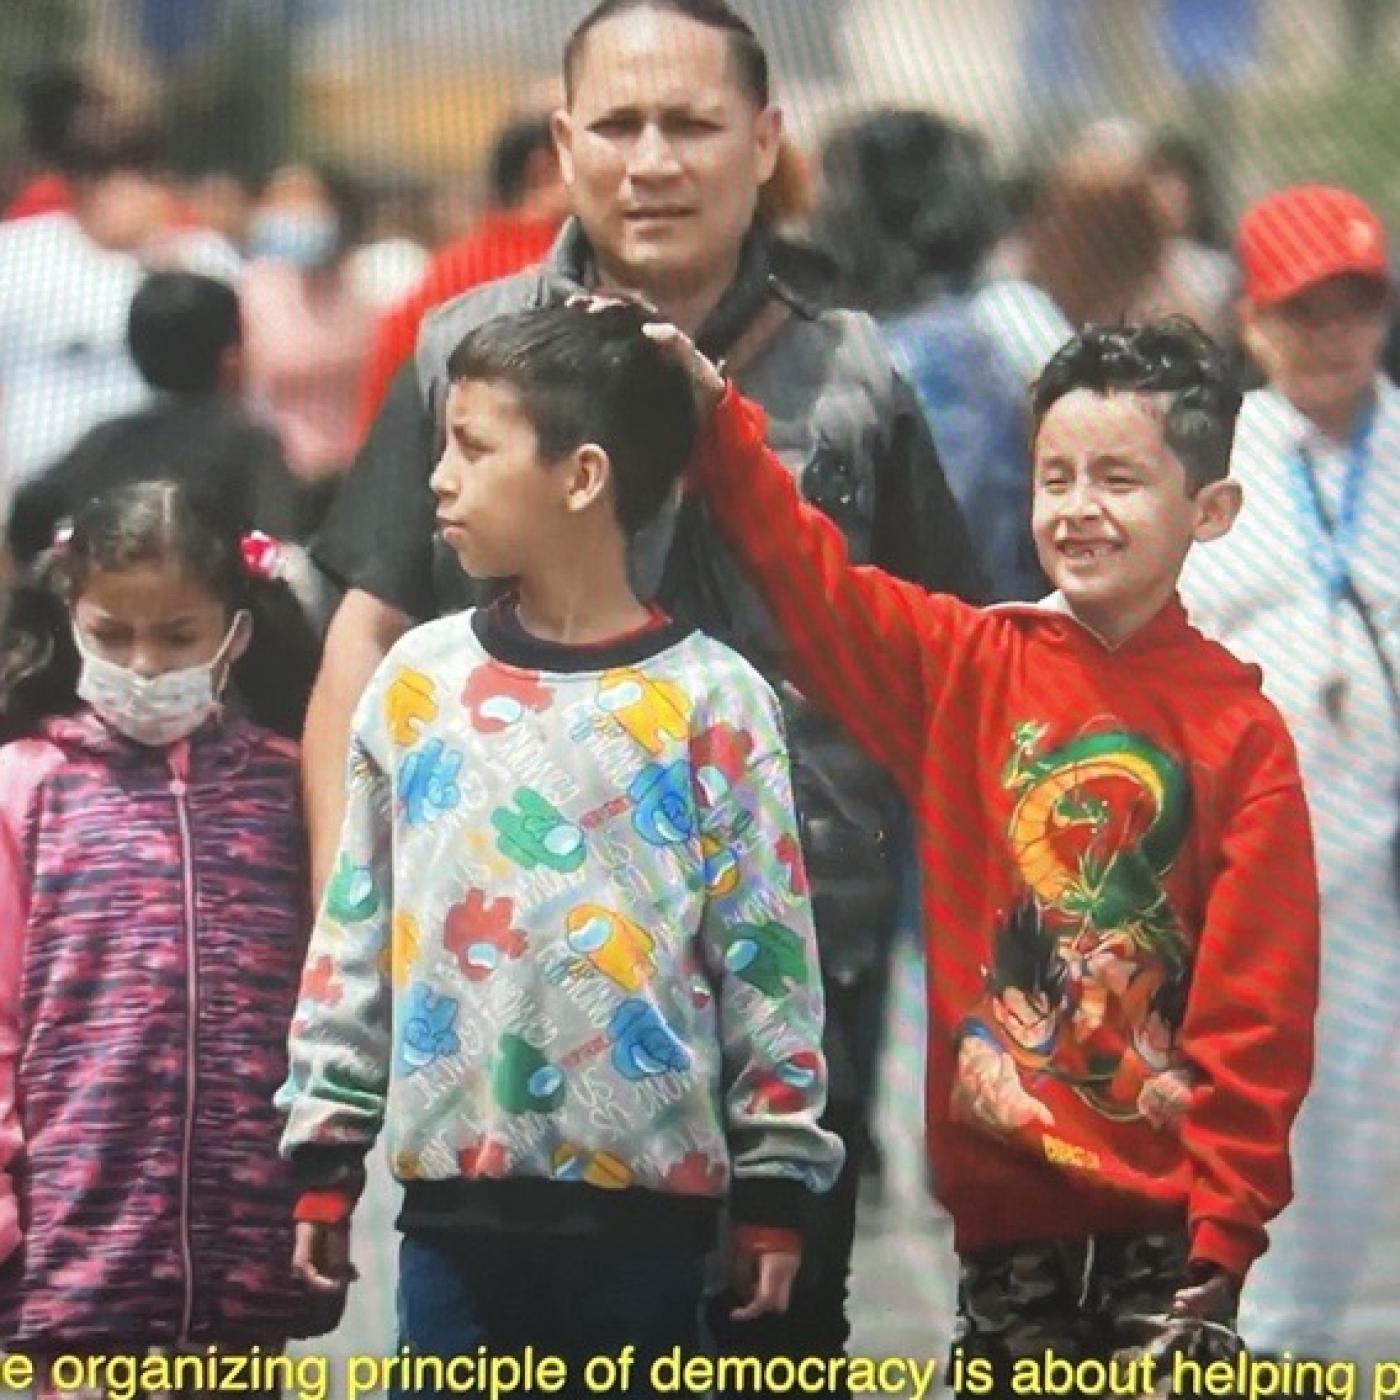 Family walking through crowded streets. Yellow text reads "The organizing principle behind democracy is helping people"